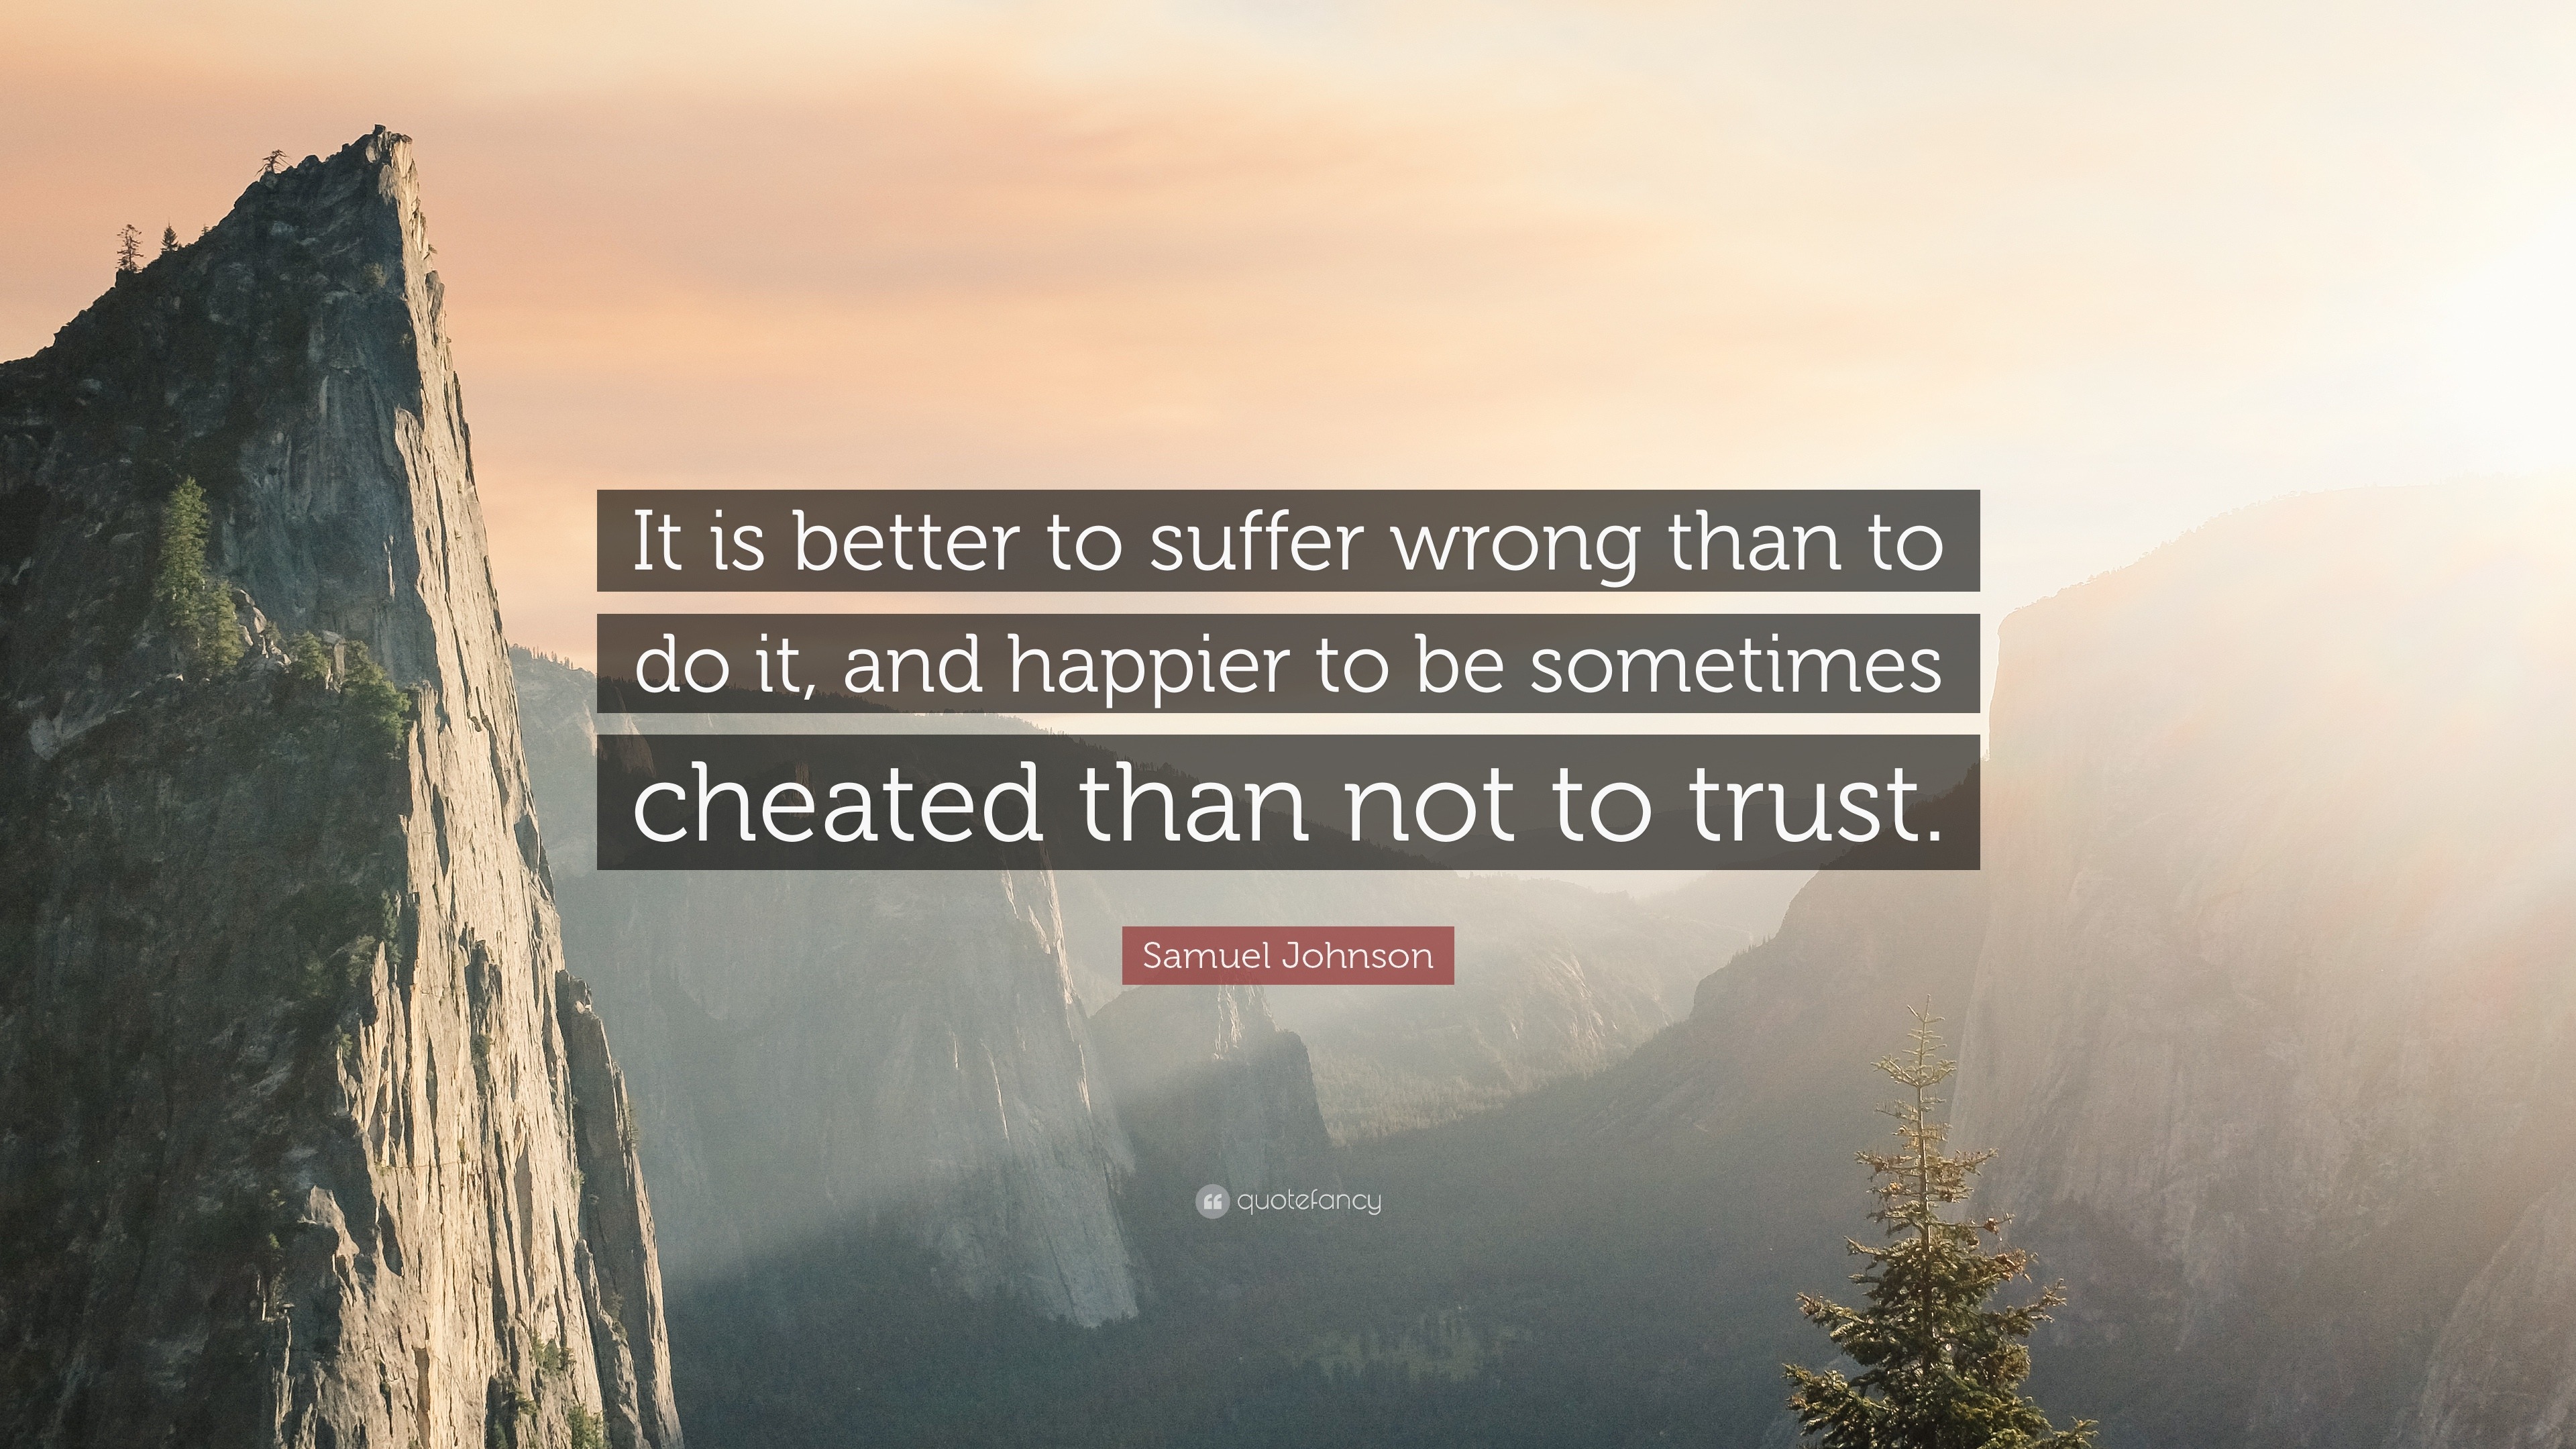 Samuel Johnson Quote: “It is better to suffer wrong than to do it, and